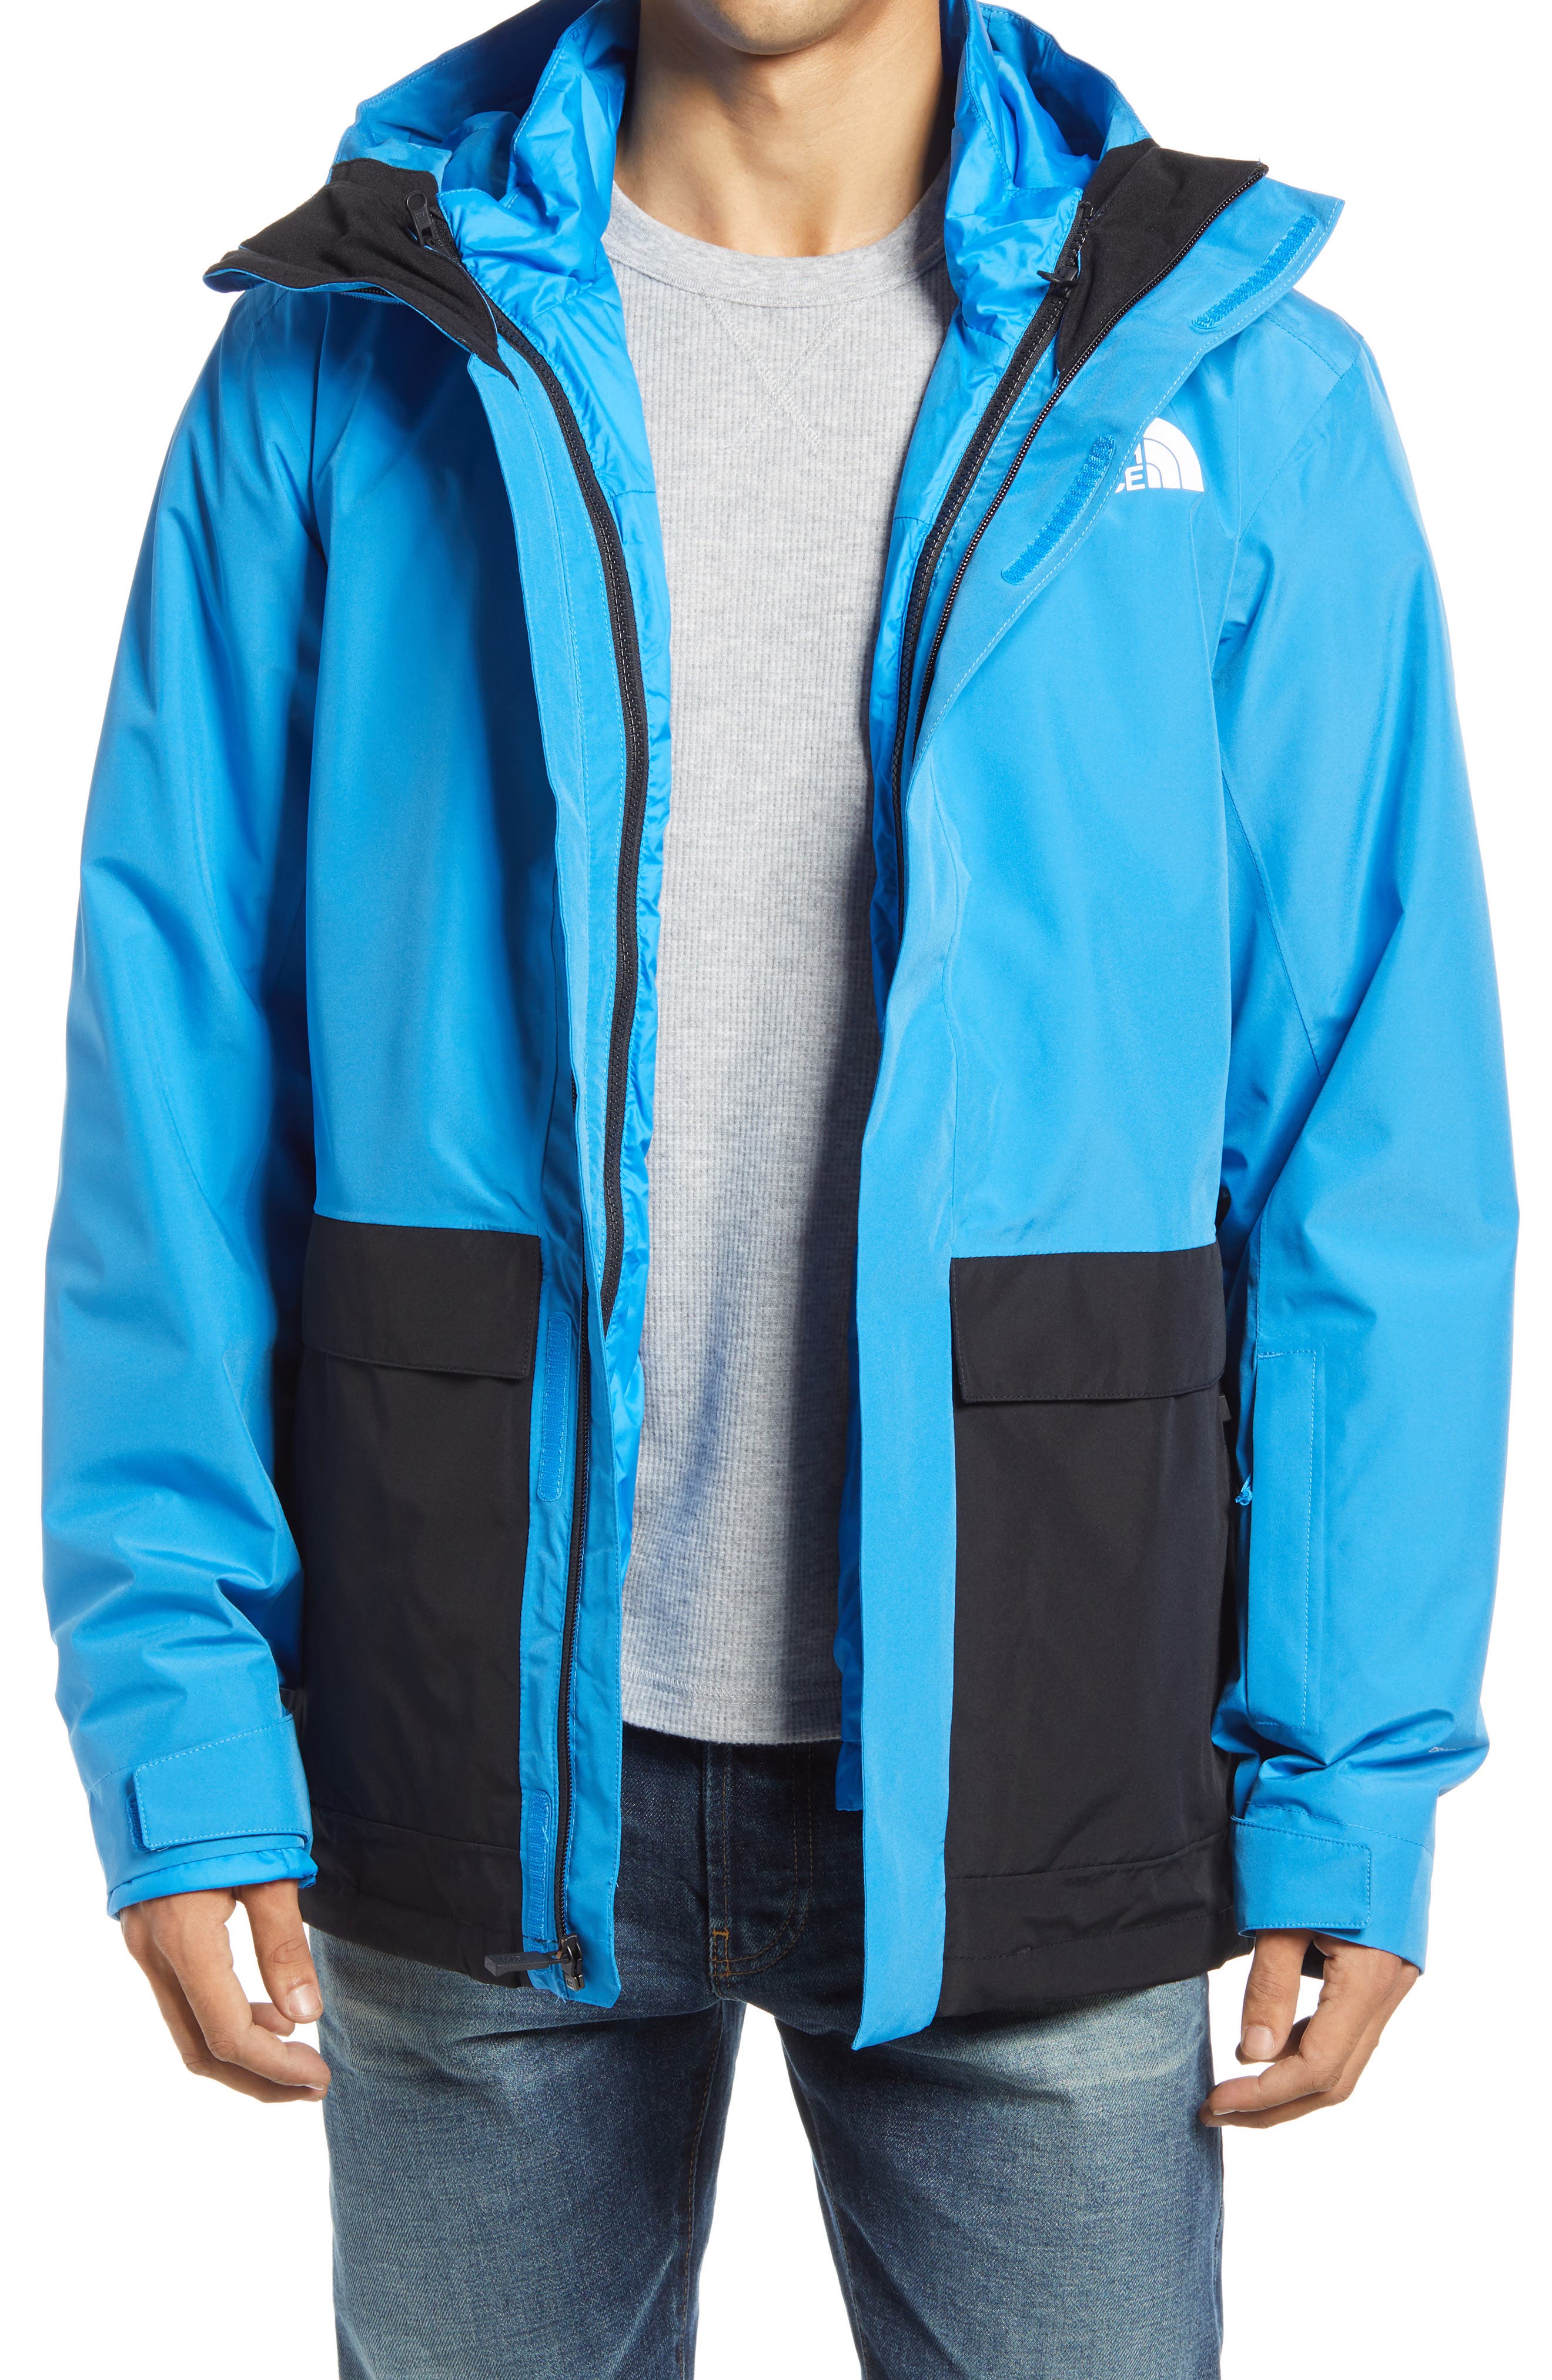 2 in 1 north face jacket